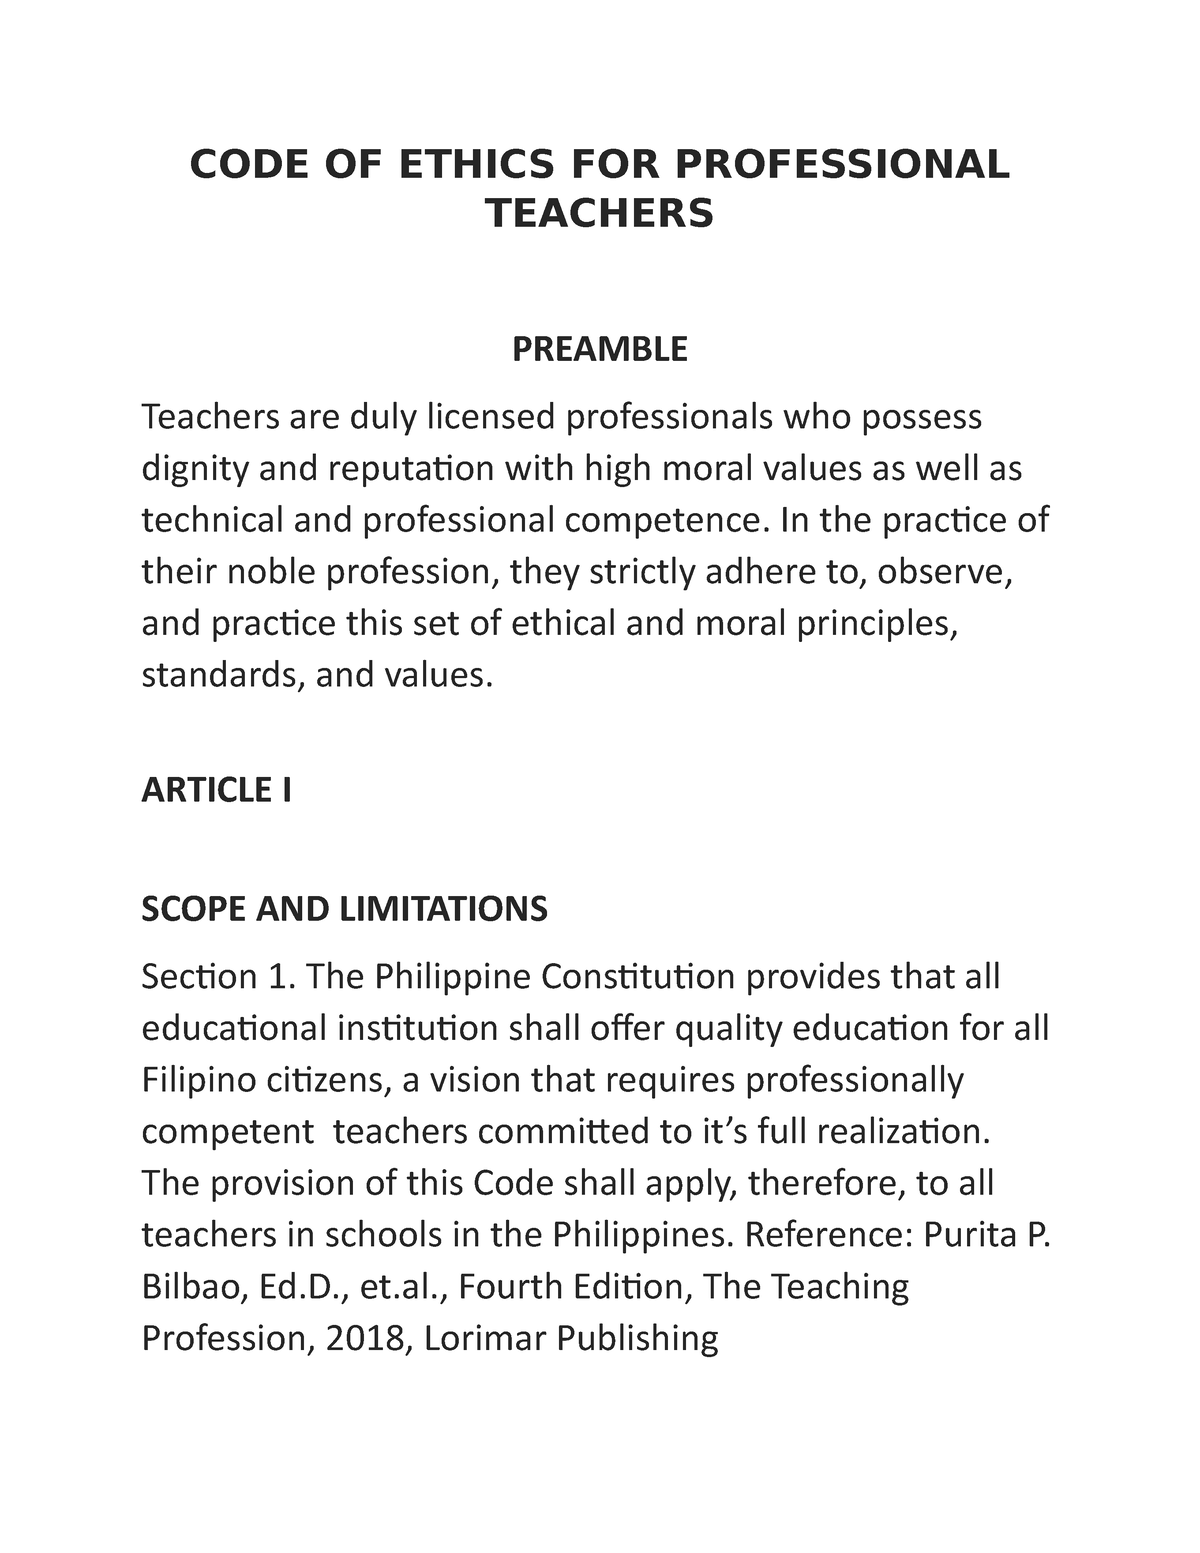 essay about code of ethics for professional teachers